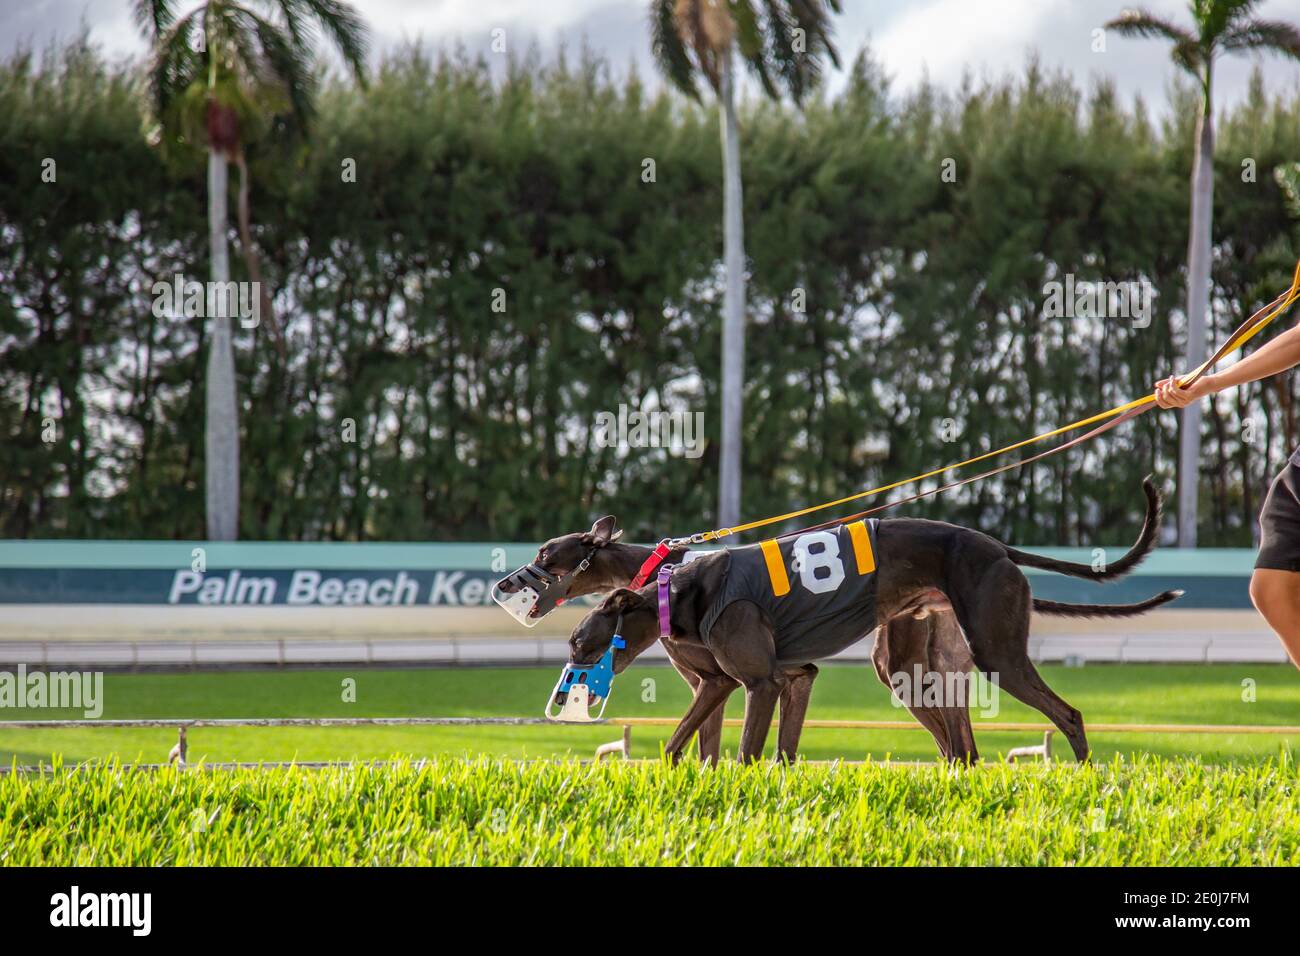 Two greyhounds rest after completing a race at the Palm Beach Kennel Club in West Palm Beach, Florida on the last day dog racing was legal. Stock Photo